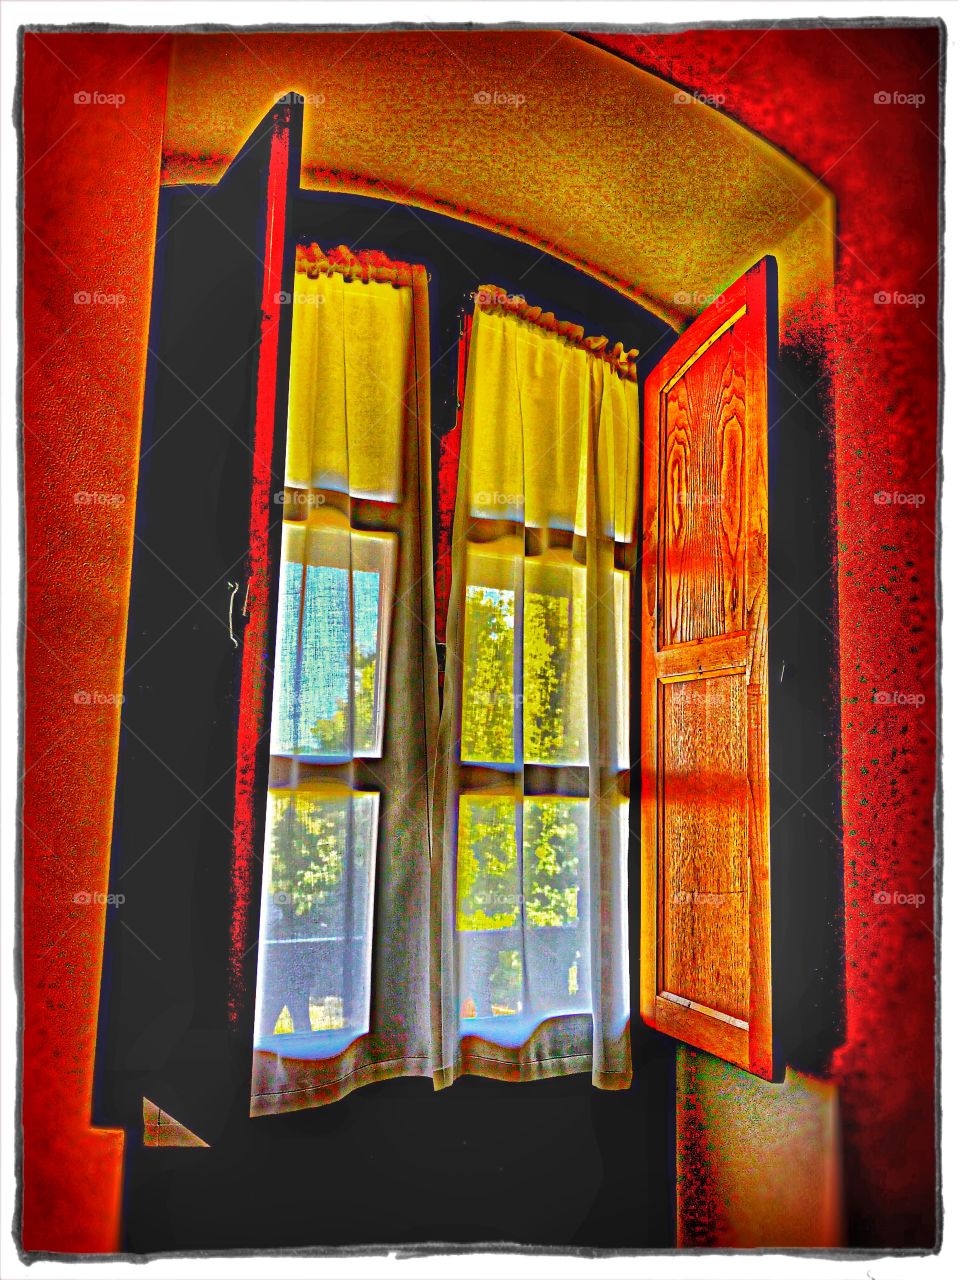 Door-Window from inside a room blue sky and tree through the curtains